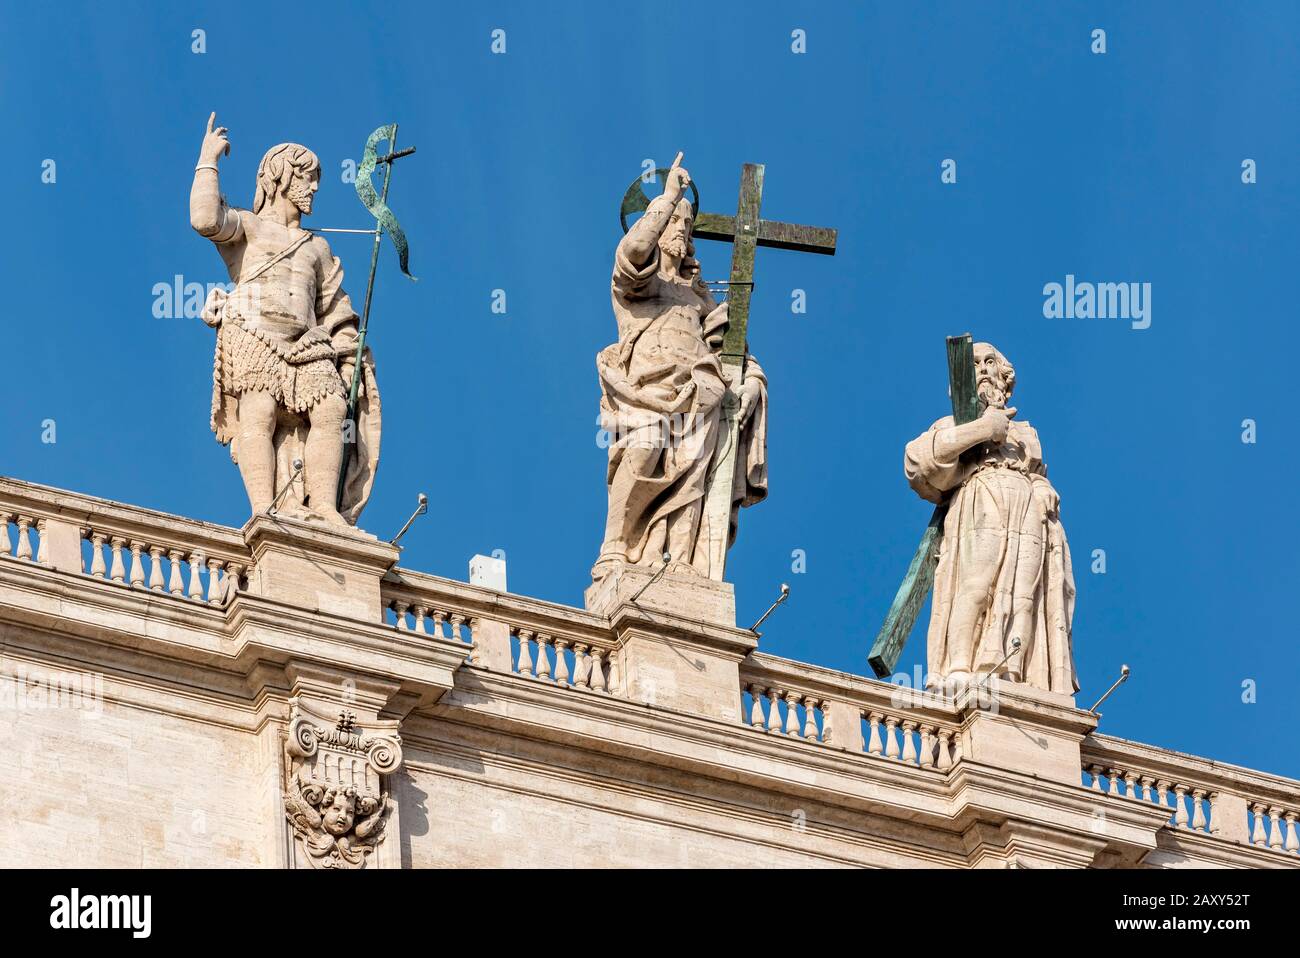 Statues of John the Baptist, Jesus Christ and St. Andrew on the facade of St Peter's Basilica, Piazza San Pietro, Vatican, Rome, Italy Stock Photo